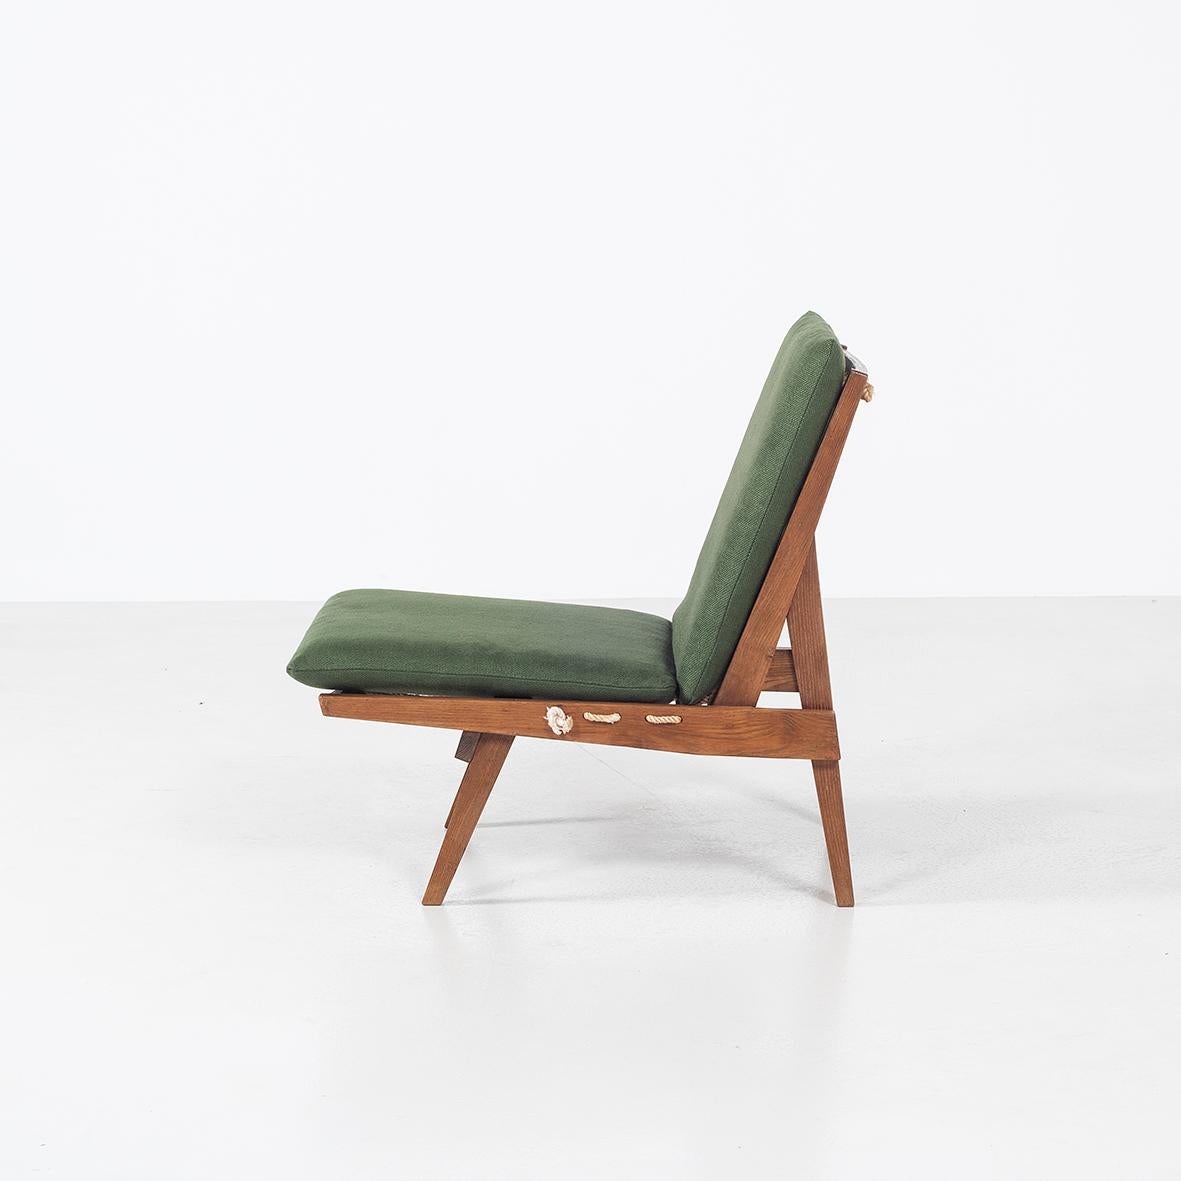 Japanese Himo Chair by Riki Watanabe, 1950s For Sale